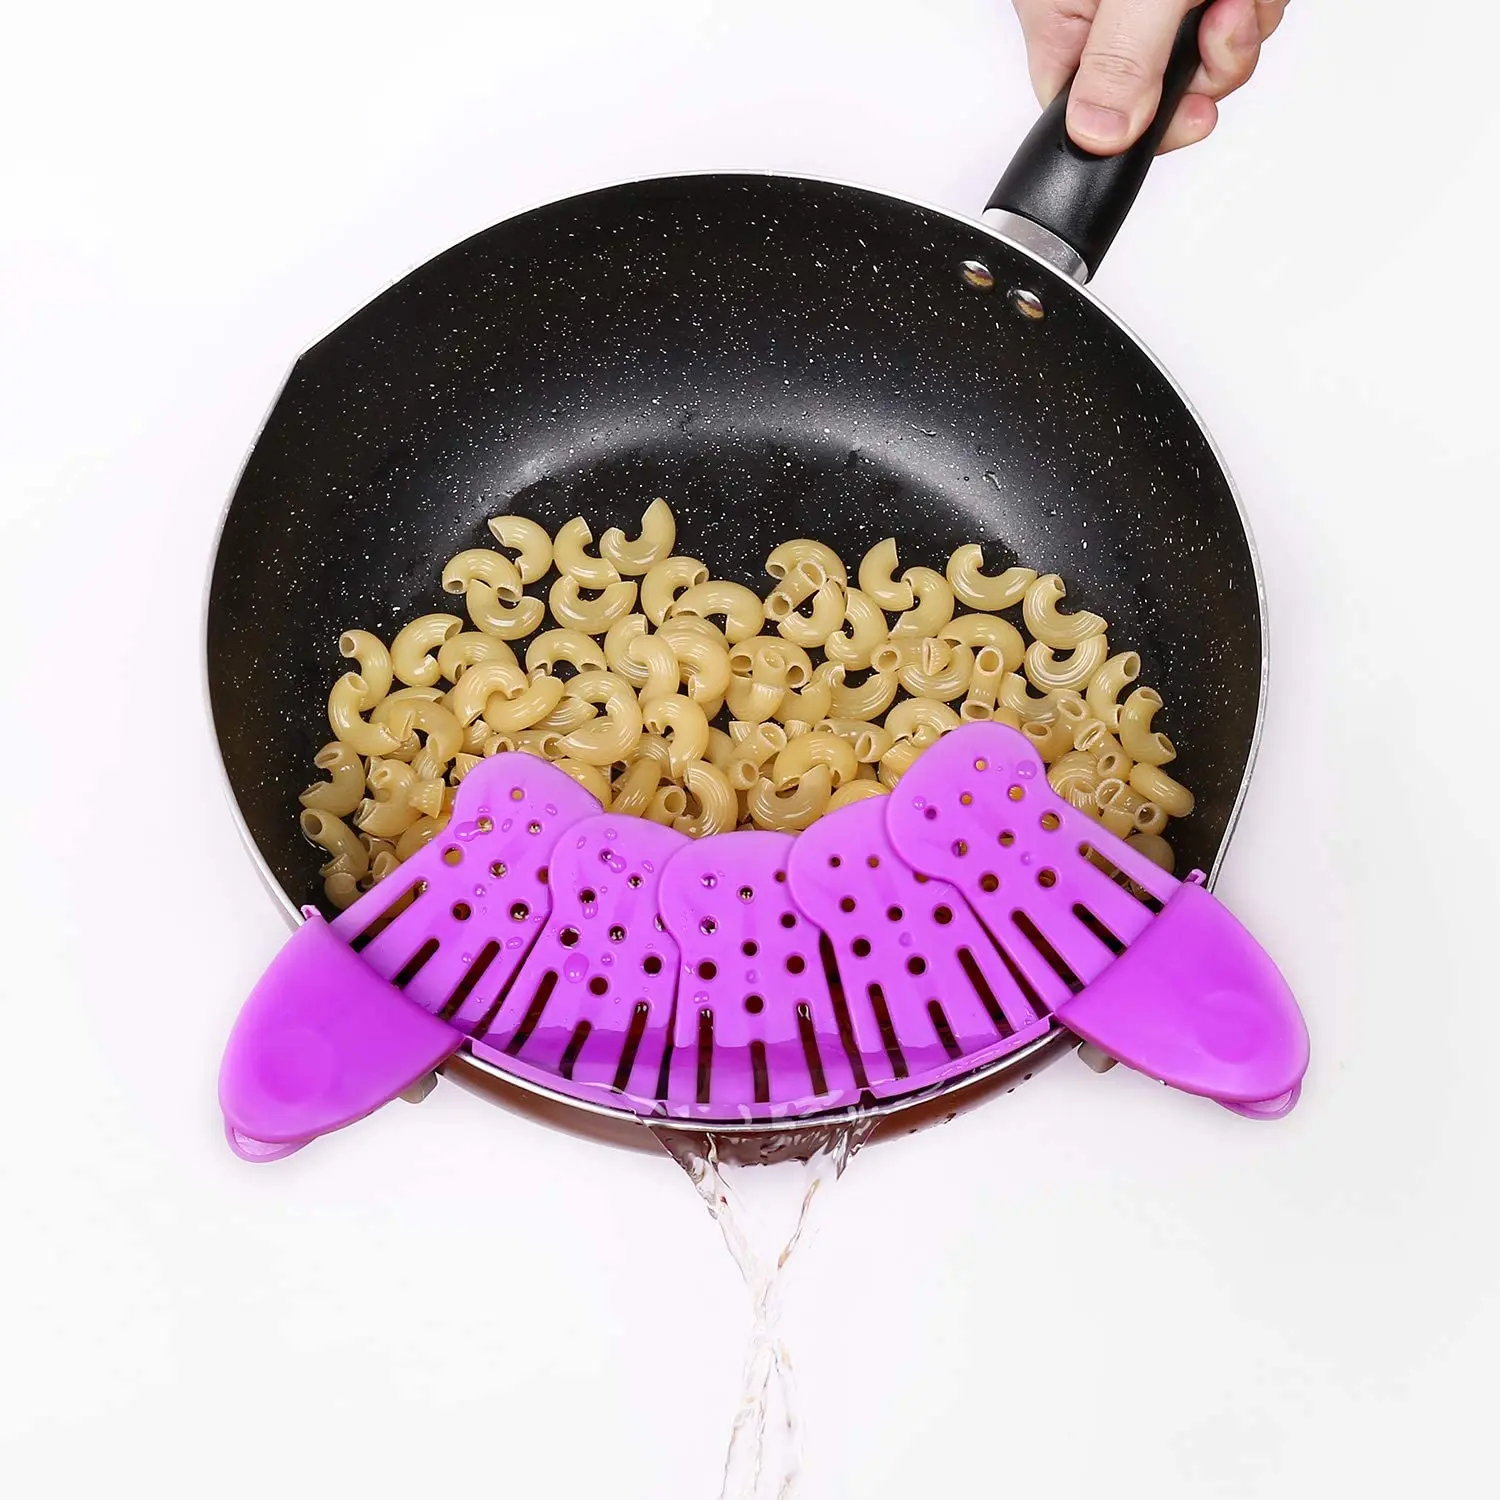 

Heat Resistant Clip On Silicone Colander Foldable Kitchen Food Strainer for Spaghetti Pasta Colander & Sieve Snaps on Bowls Pots, Green;purple